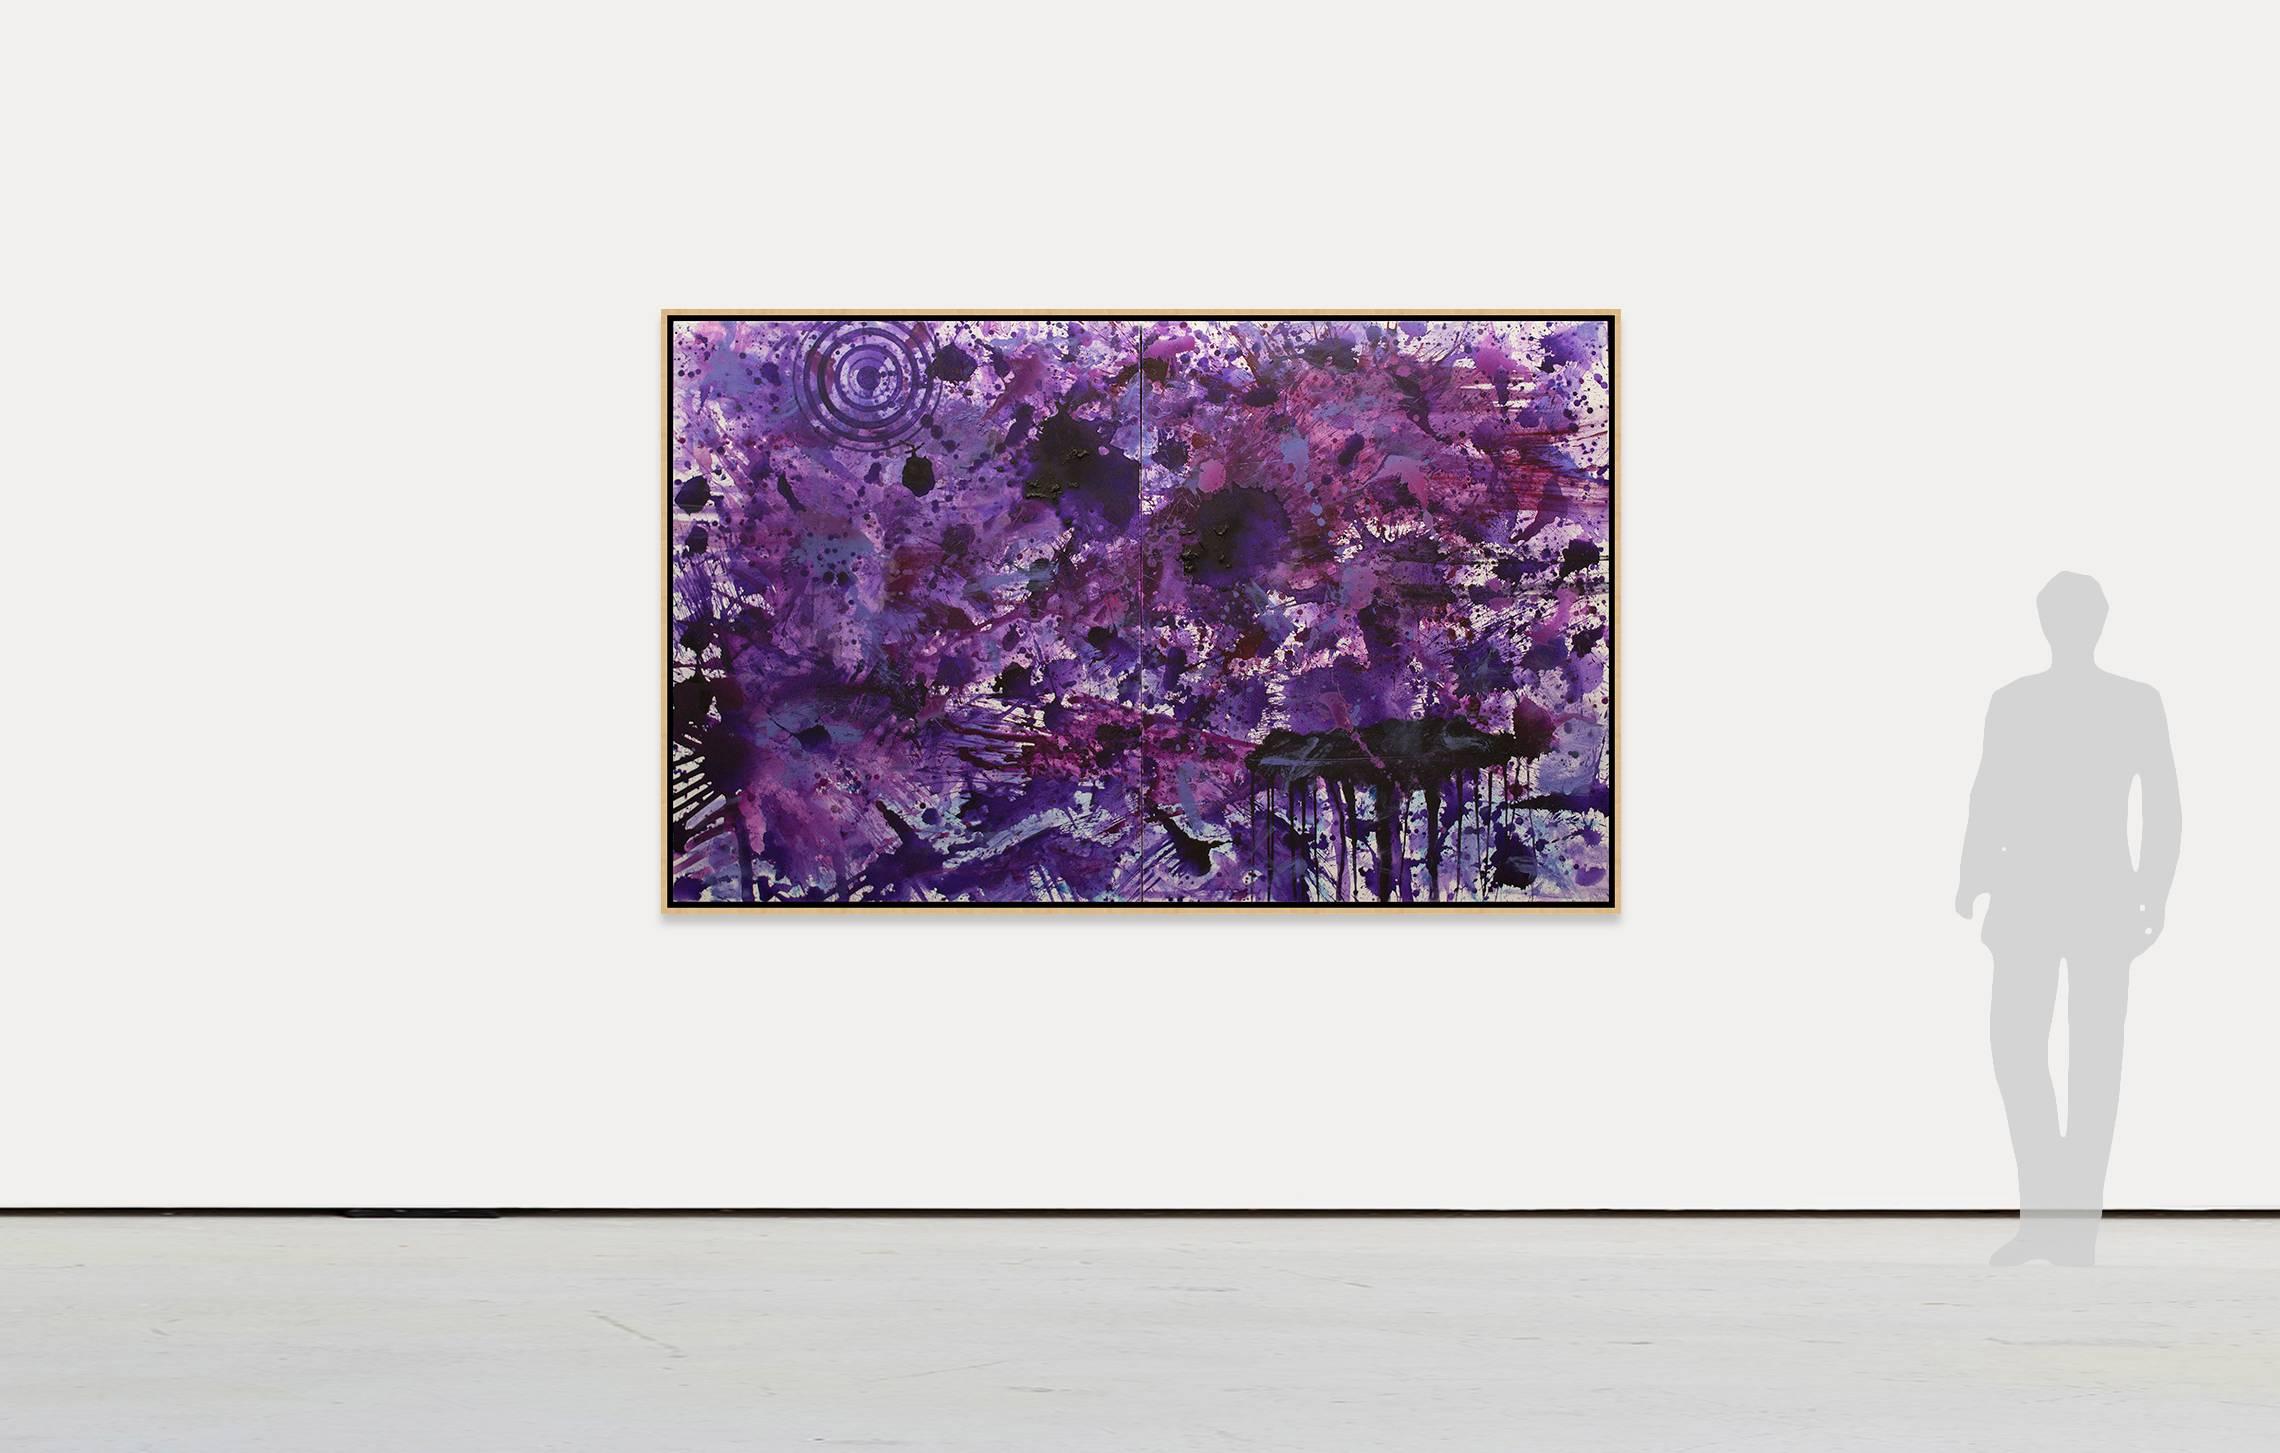 PurpleField - Abstract Expressionist Painting by J. Steven Manolis